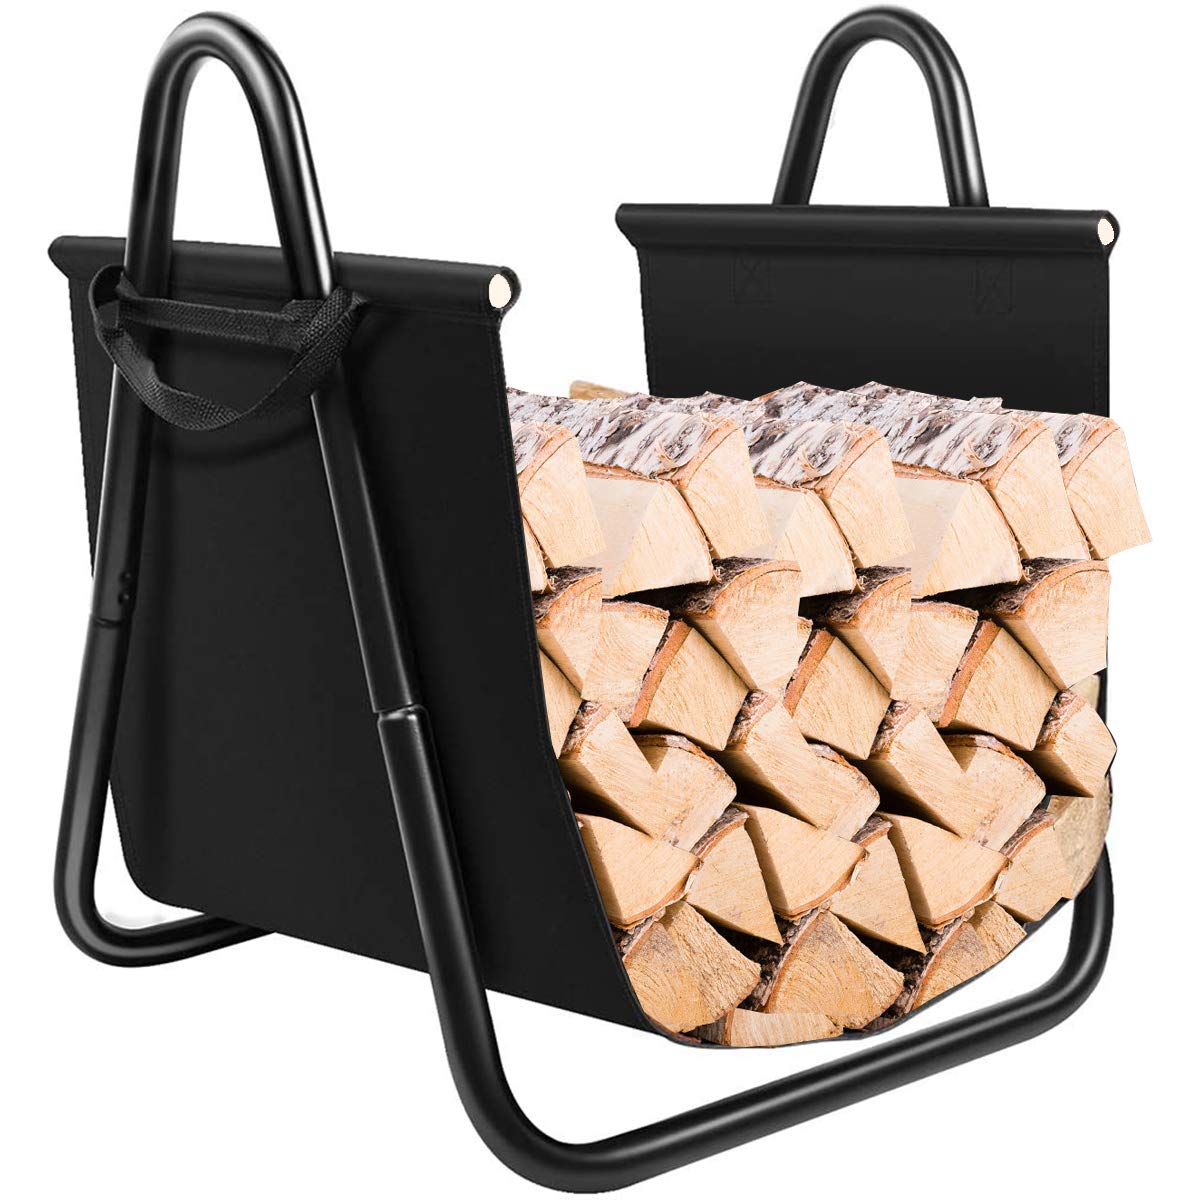 Firewood Log Holder with Canvas Tote Carrier